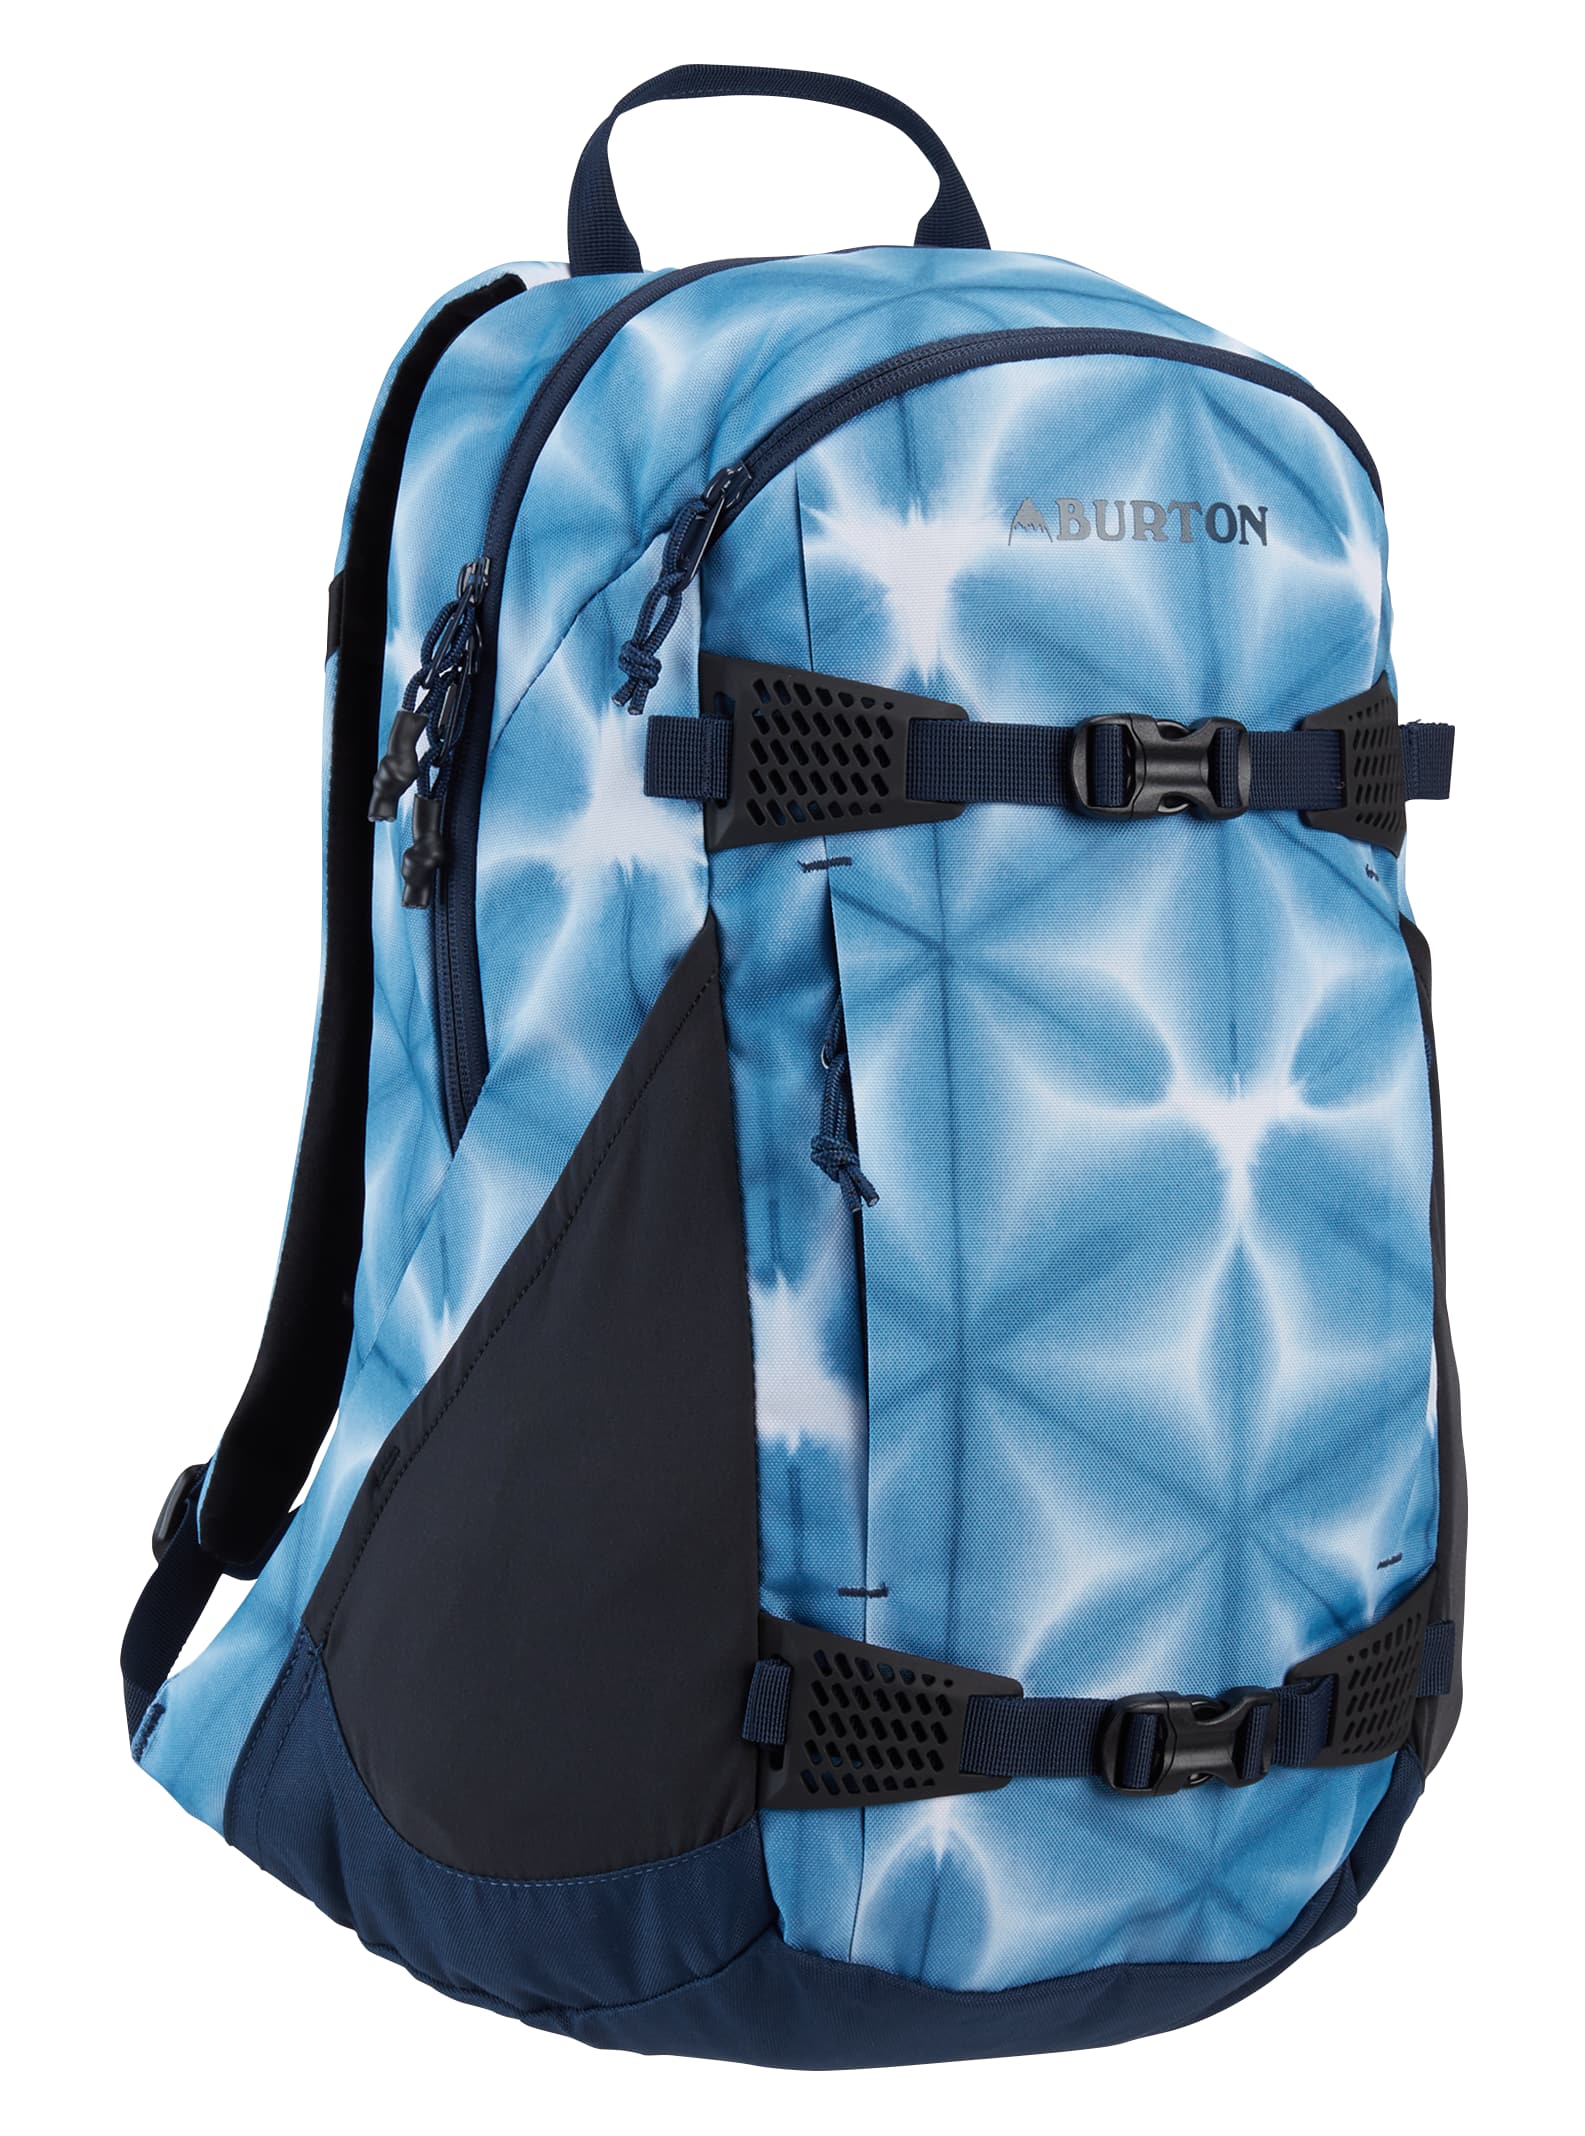 Details about   BURTON DAY HIKER PACK BRAND NEW!!! SIZES & COLORS AVAILABLE WOMEN'S - 